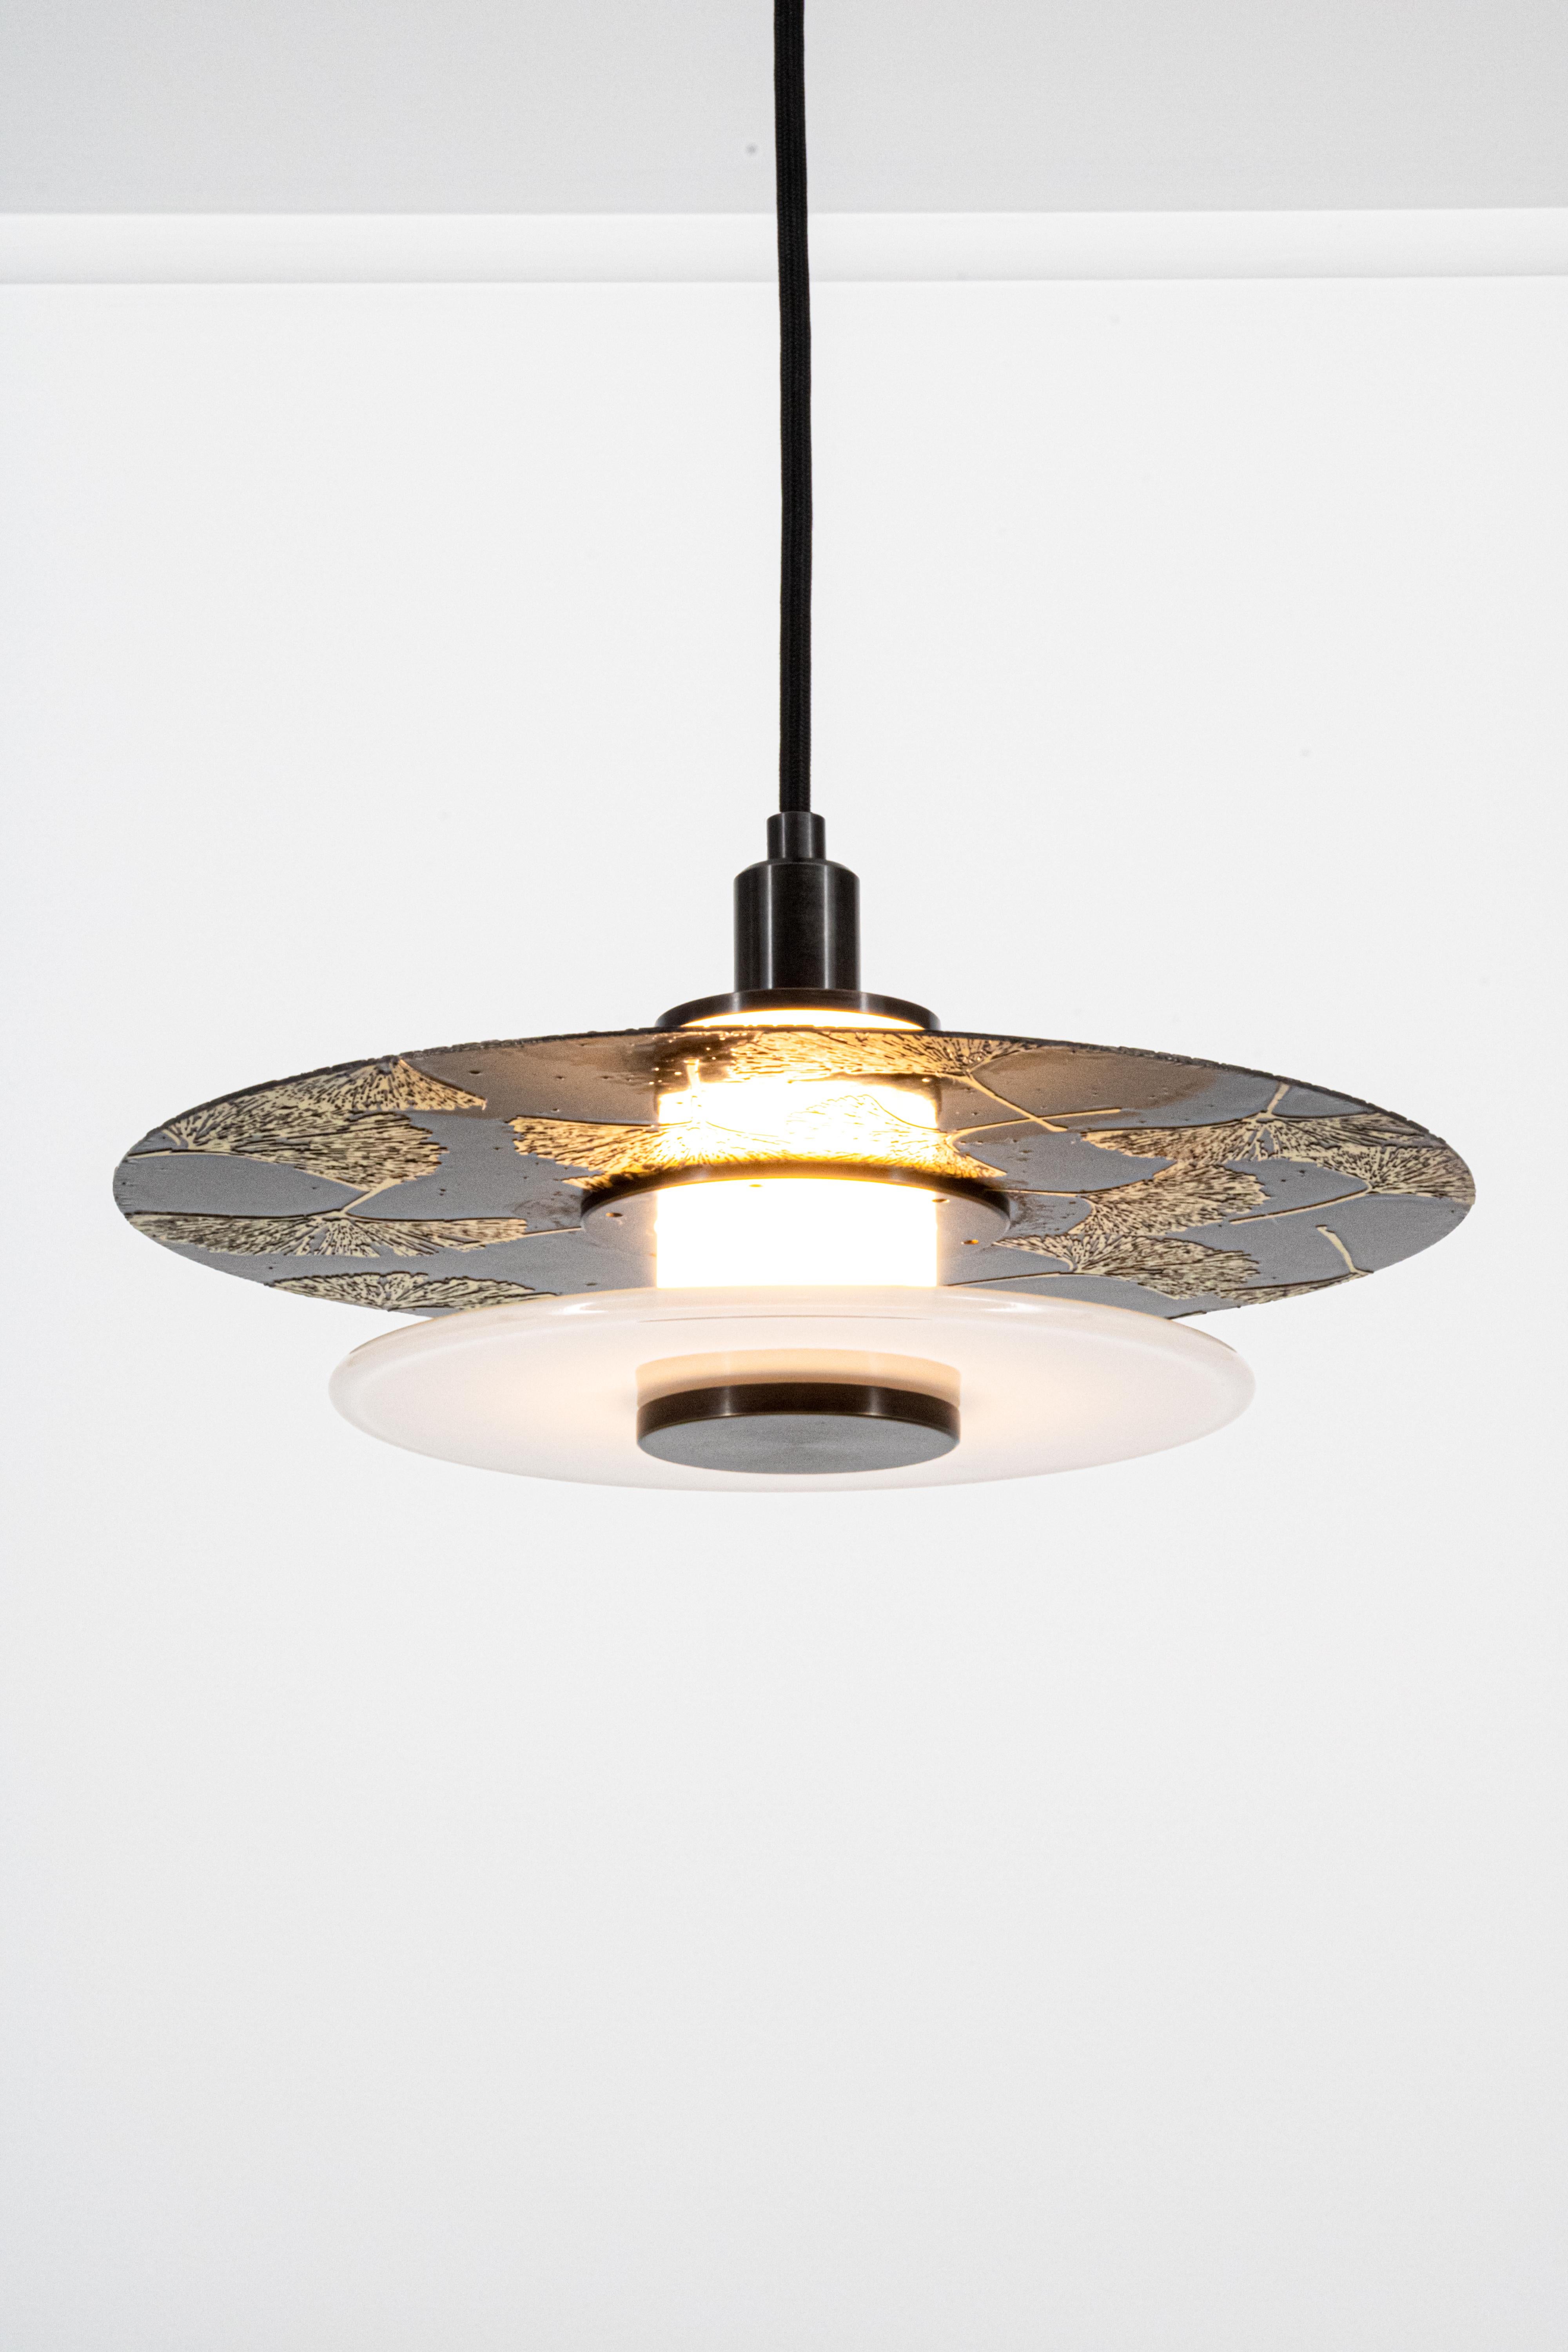 Klein Pendant w/ Milk Glass, Etched Ginkgo Relief in Blackened Brass For Sale 4